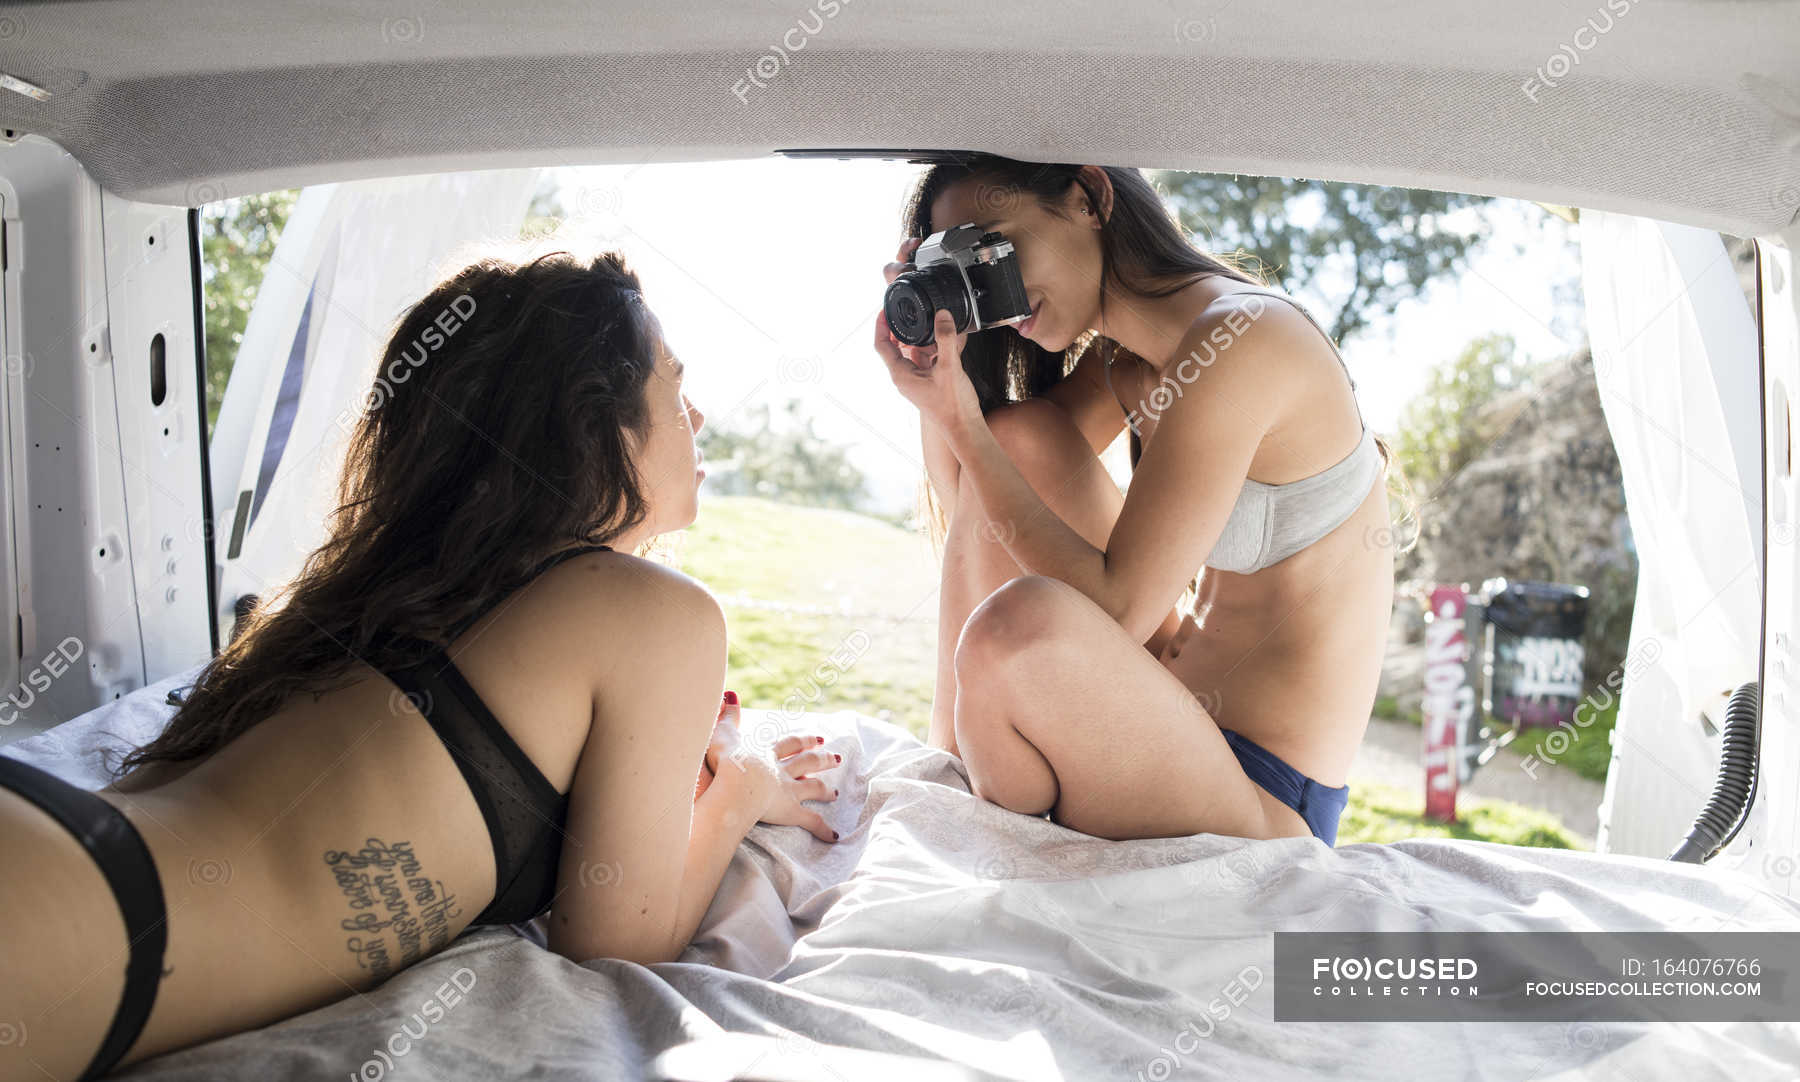 pain to withdraw Against Lesbian couple wearing lingerie — daylight, backlit - Stock Photo |  #164076766